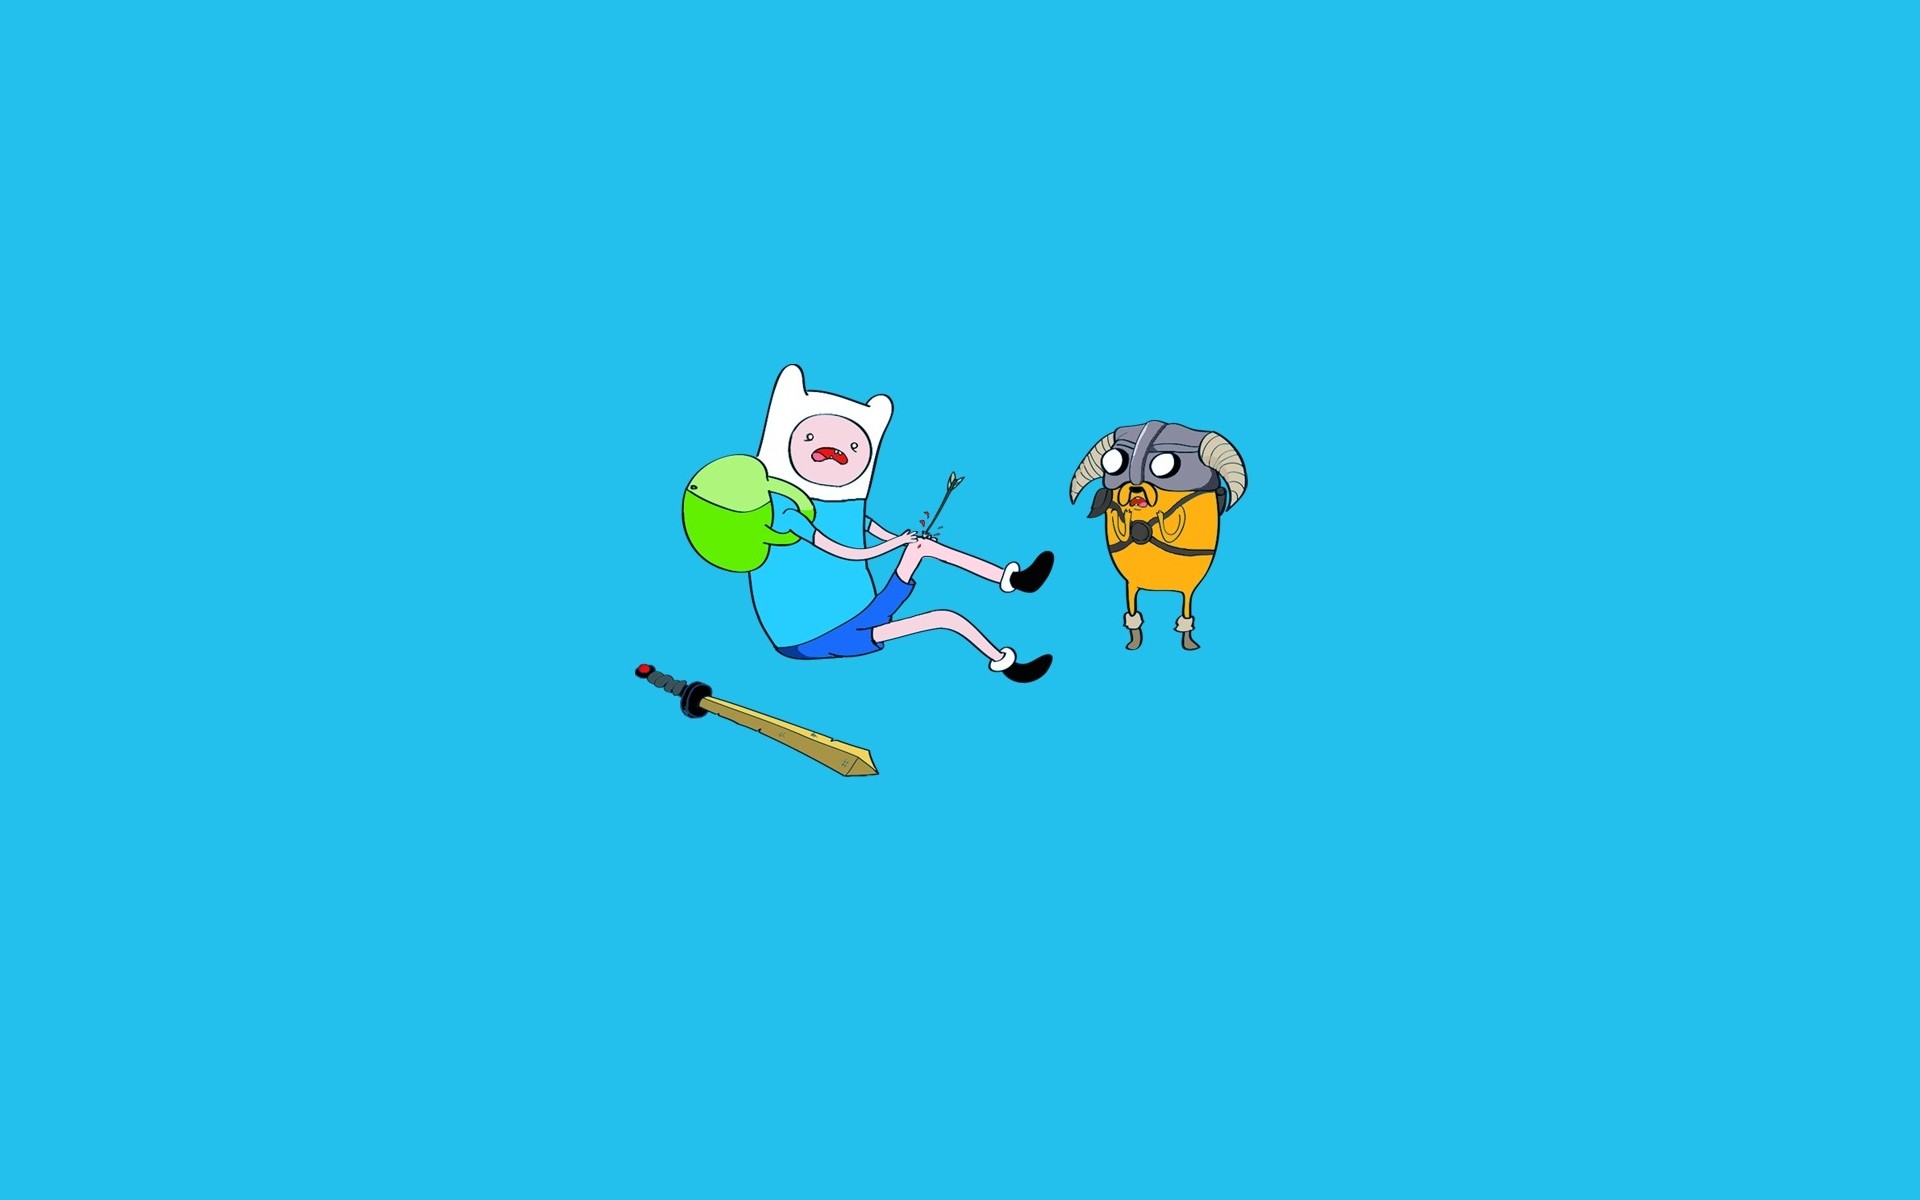 Wallpaper ID 482046  TV Show Adventure Time Phone Wallpaper  720x1280  free download